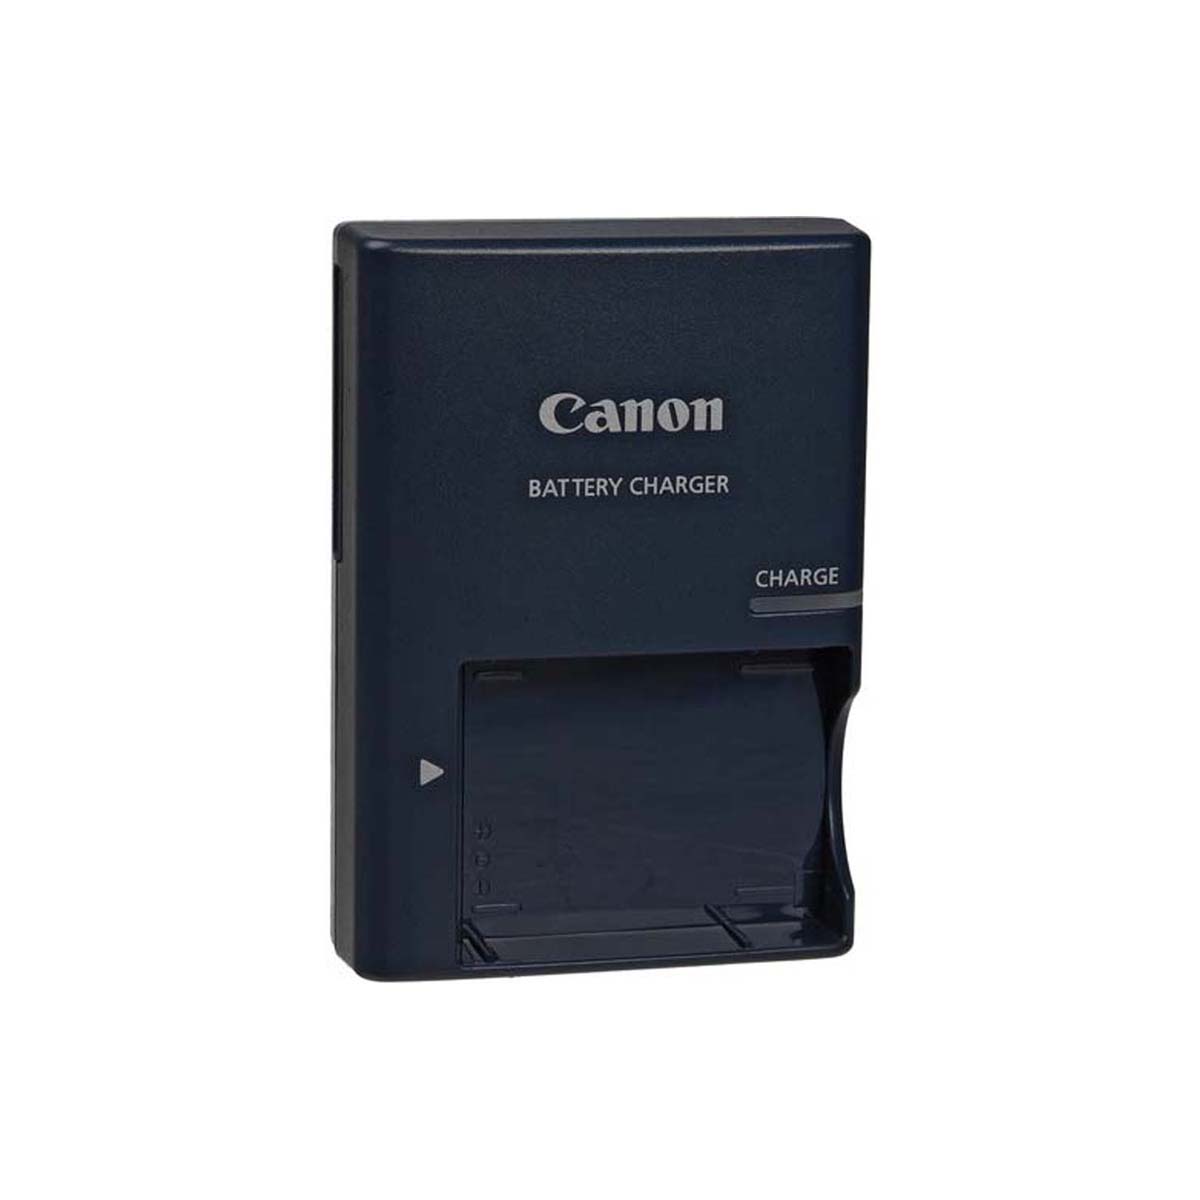 Canon - Charger, NB-5L Battery